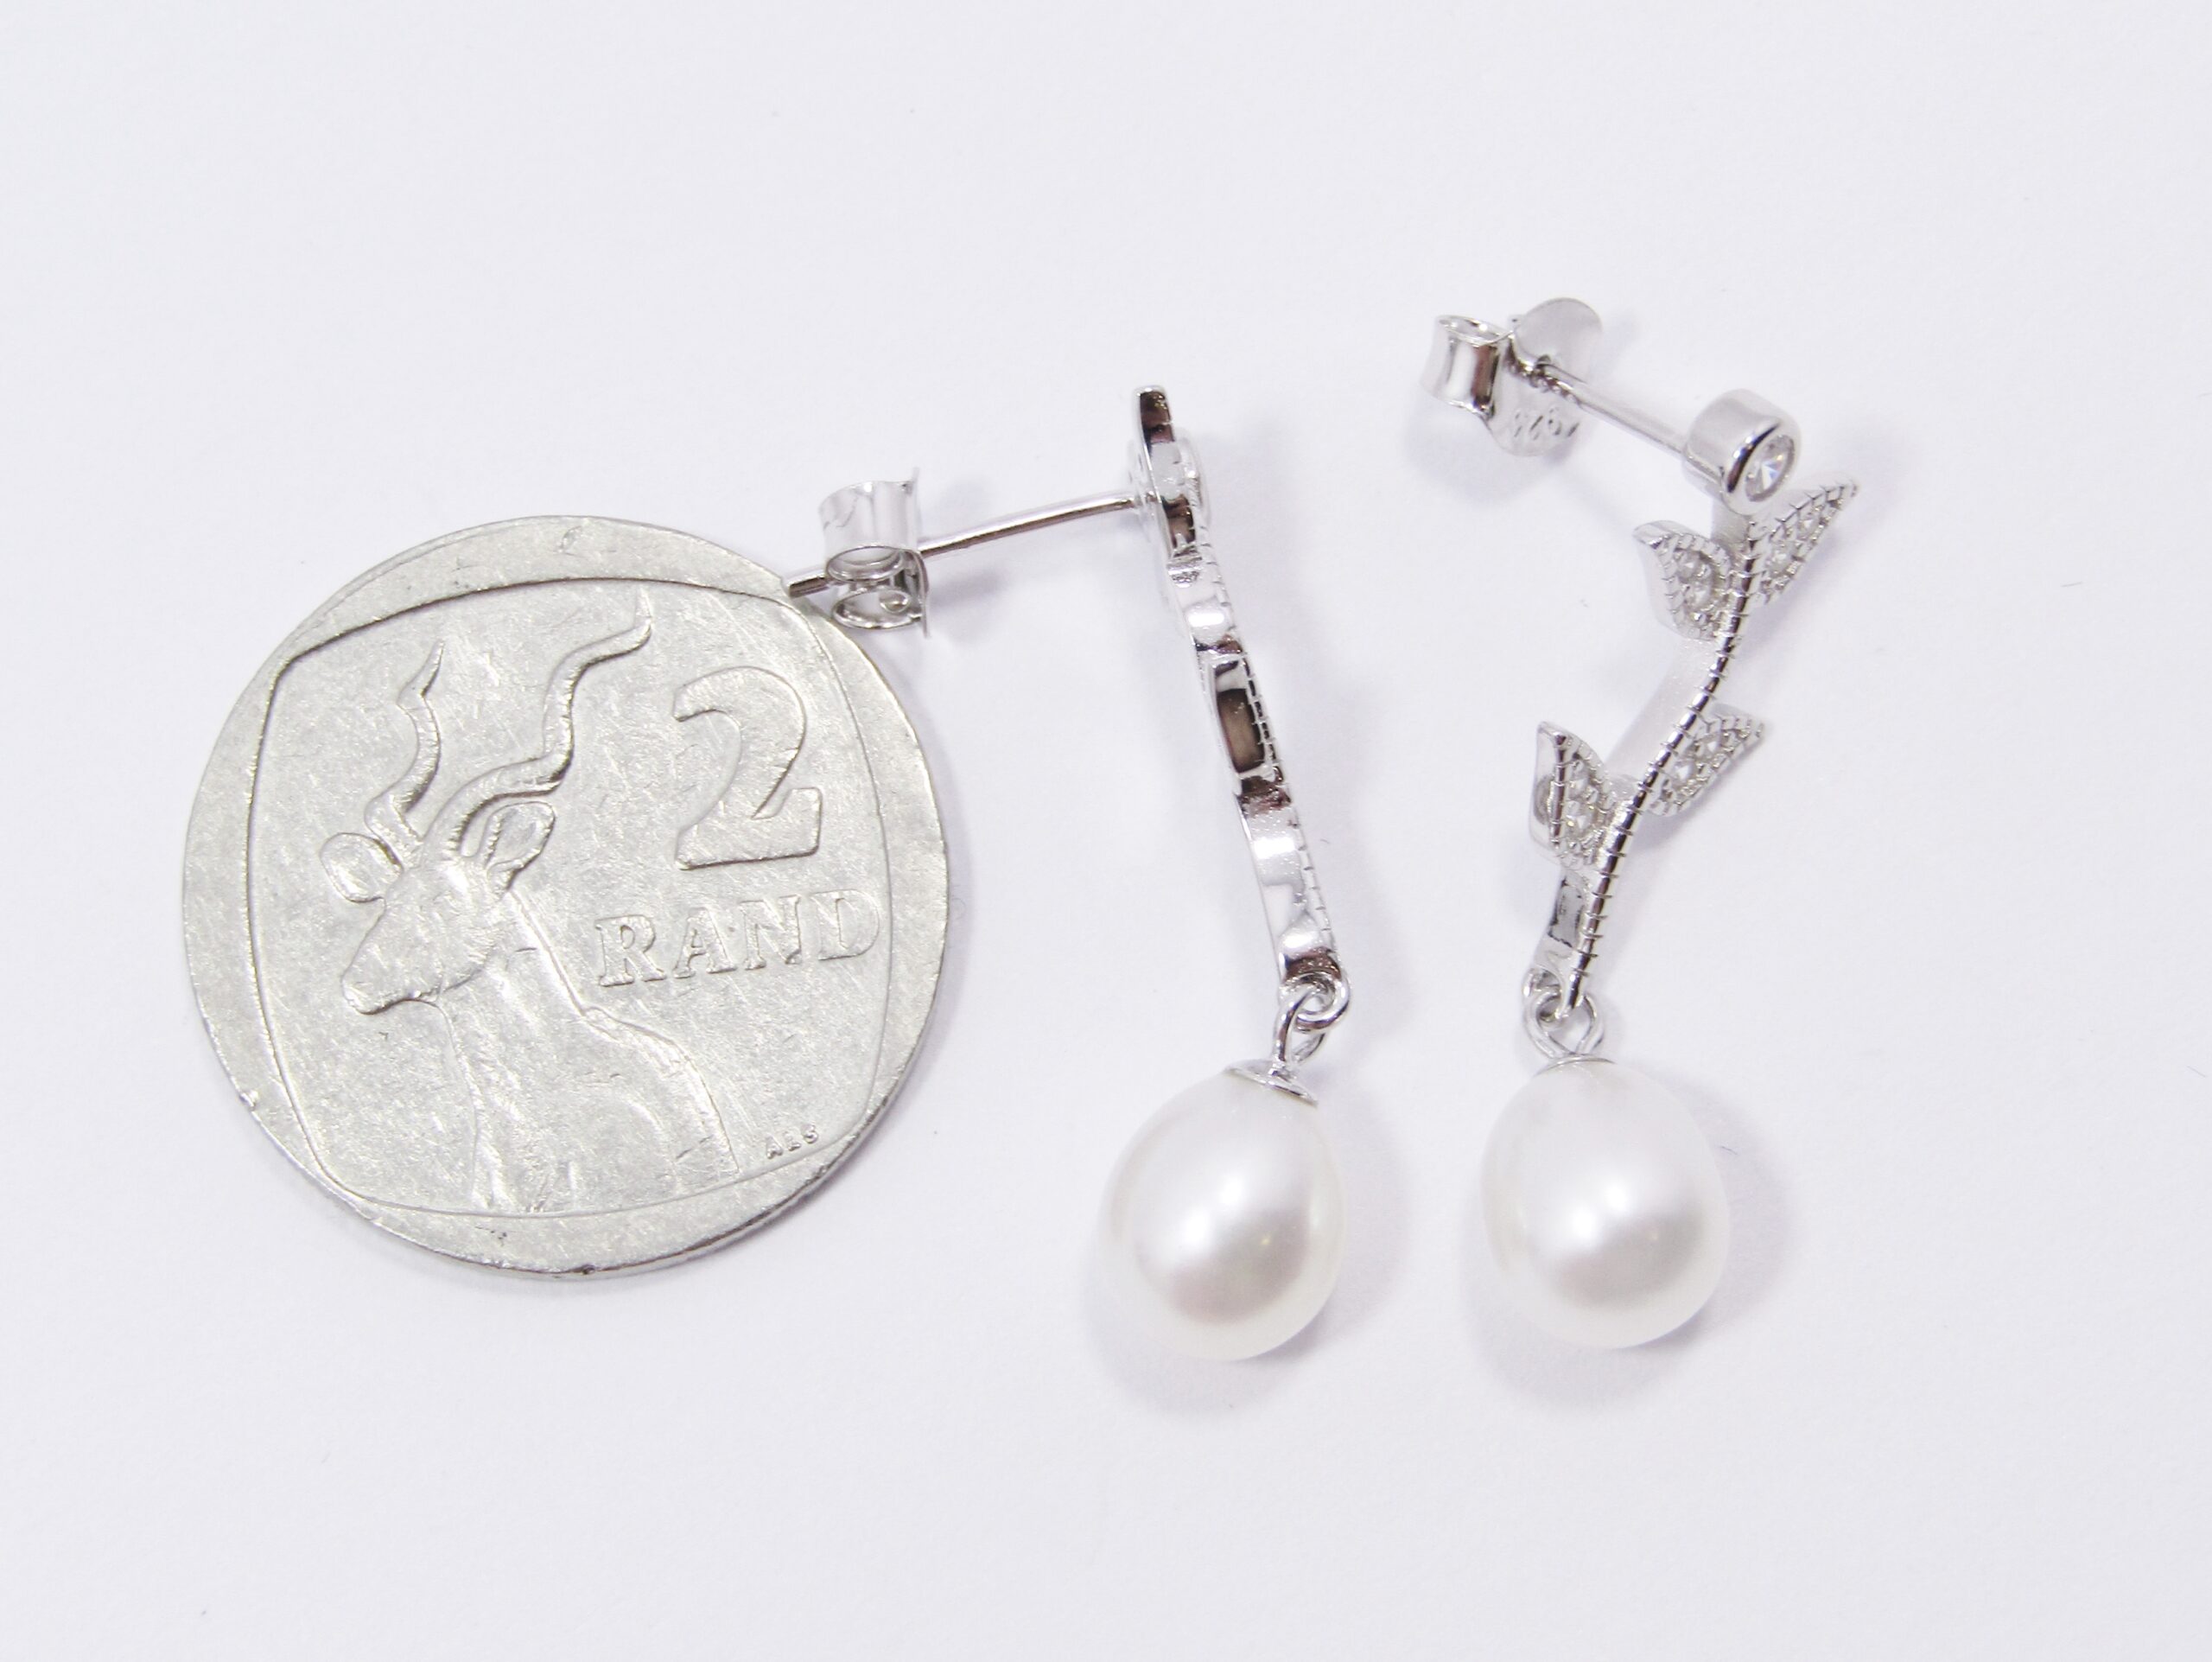 A Pair of Fresh Water Dangling Earrings with Tiny Clear Crystals for Sparkle in Sterling Silver